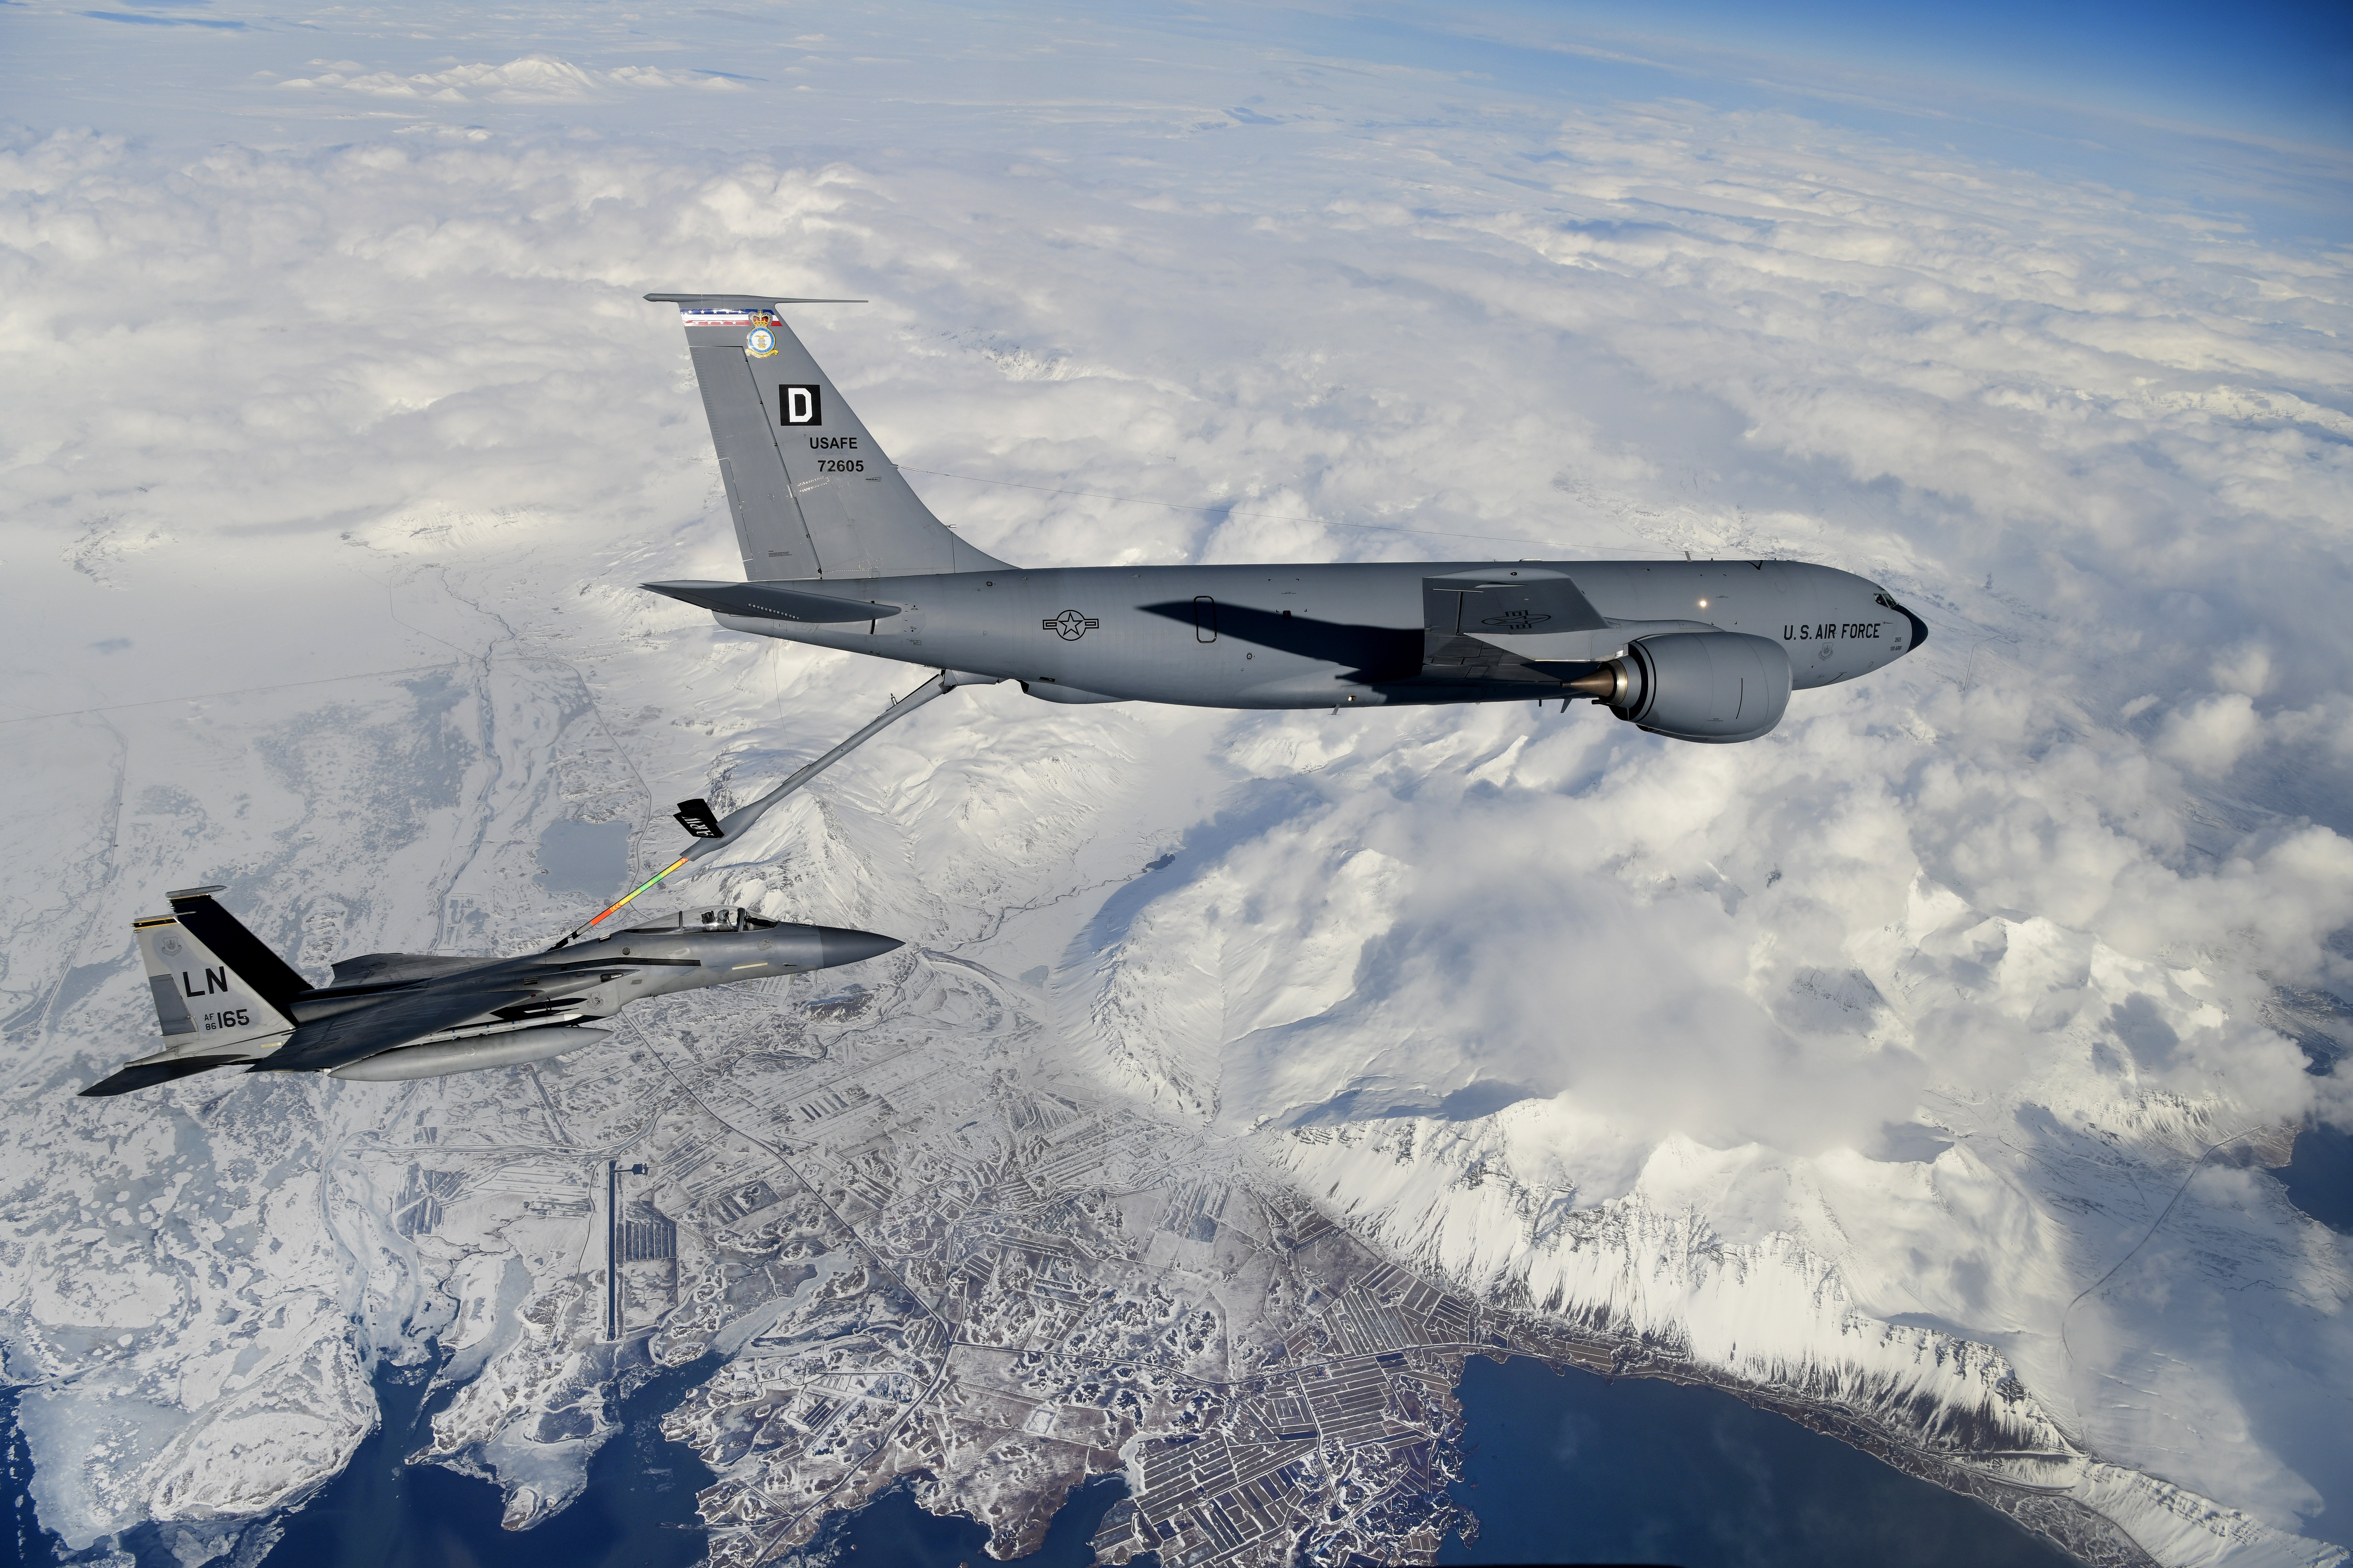 A KC-135 Stratotanker assigned to the 100th Air Refueling Wing and an F-15C Eagle assigned to the 493rd Fighter Squadron conduct routine aerial operations in support of Bomber Task Force Europe over Keflavik, Iceland, March 16, 2020. Bomber missions provide opportunities to train and work with NATO allies and theater partners in combined and joint operations and exercises. (U.S. Air Force photo/ Master Sgt. Matthew Plew)